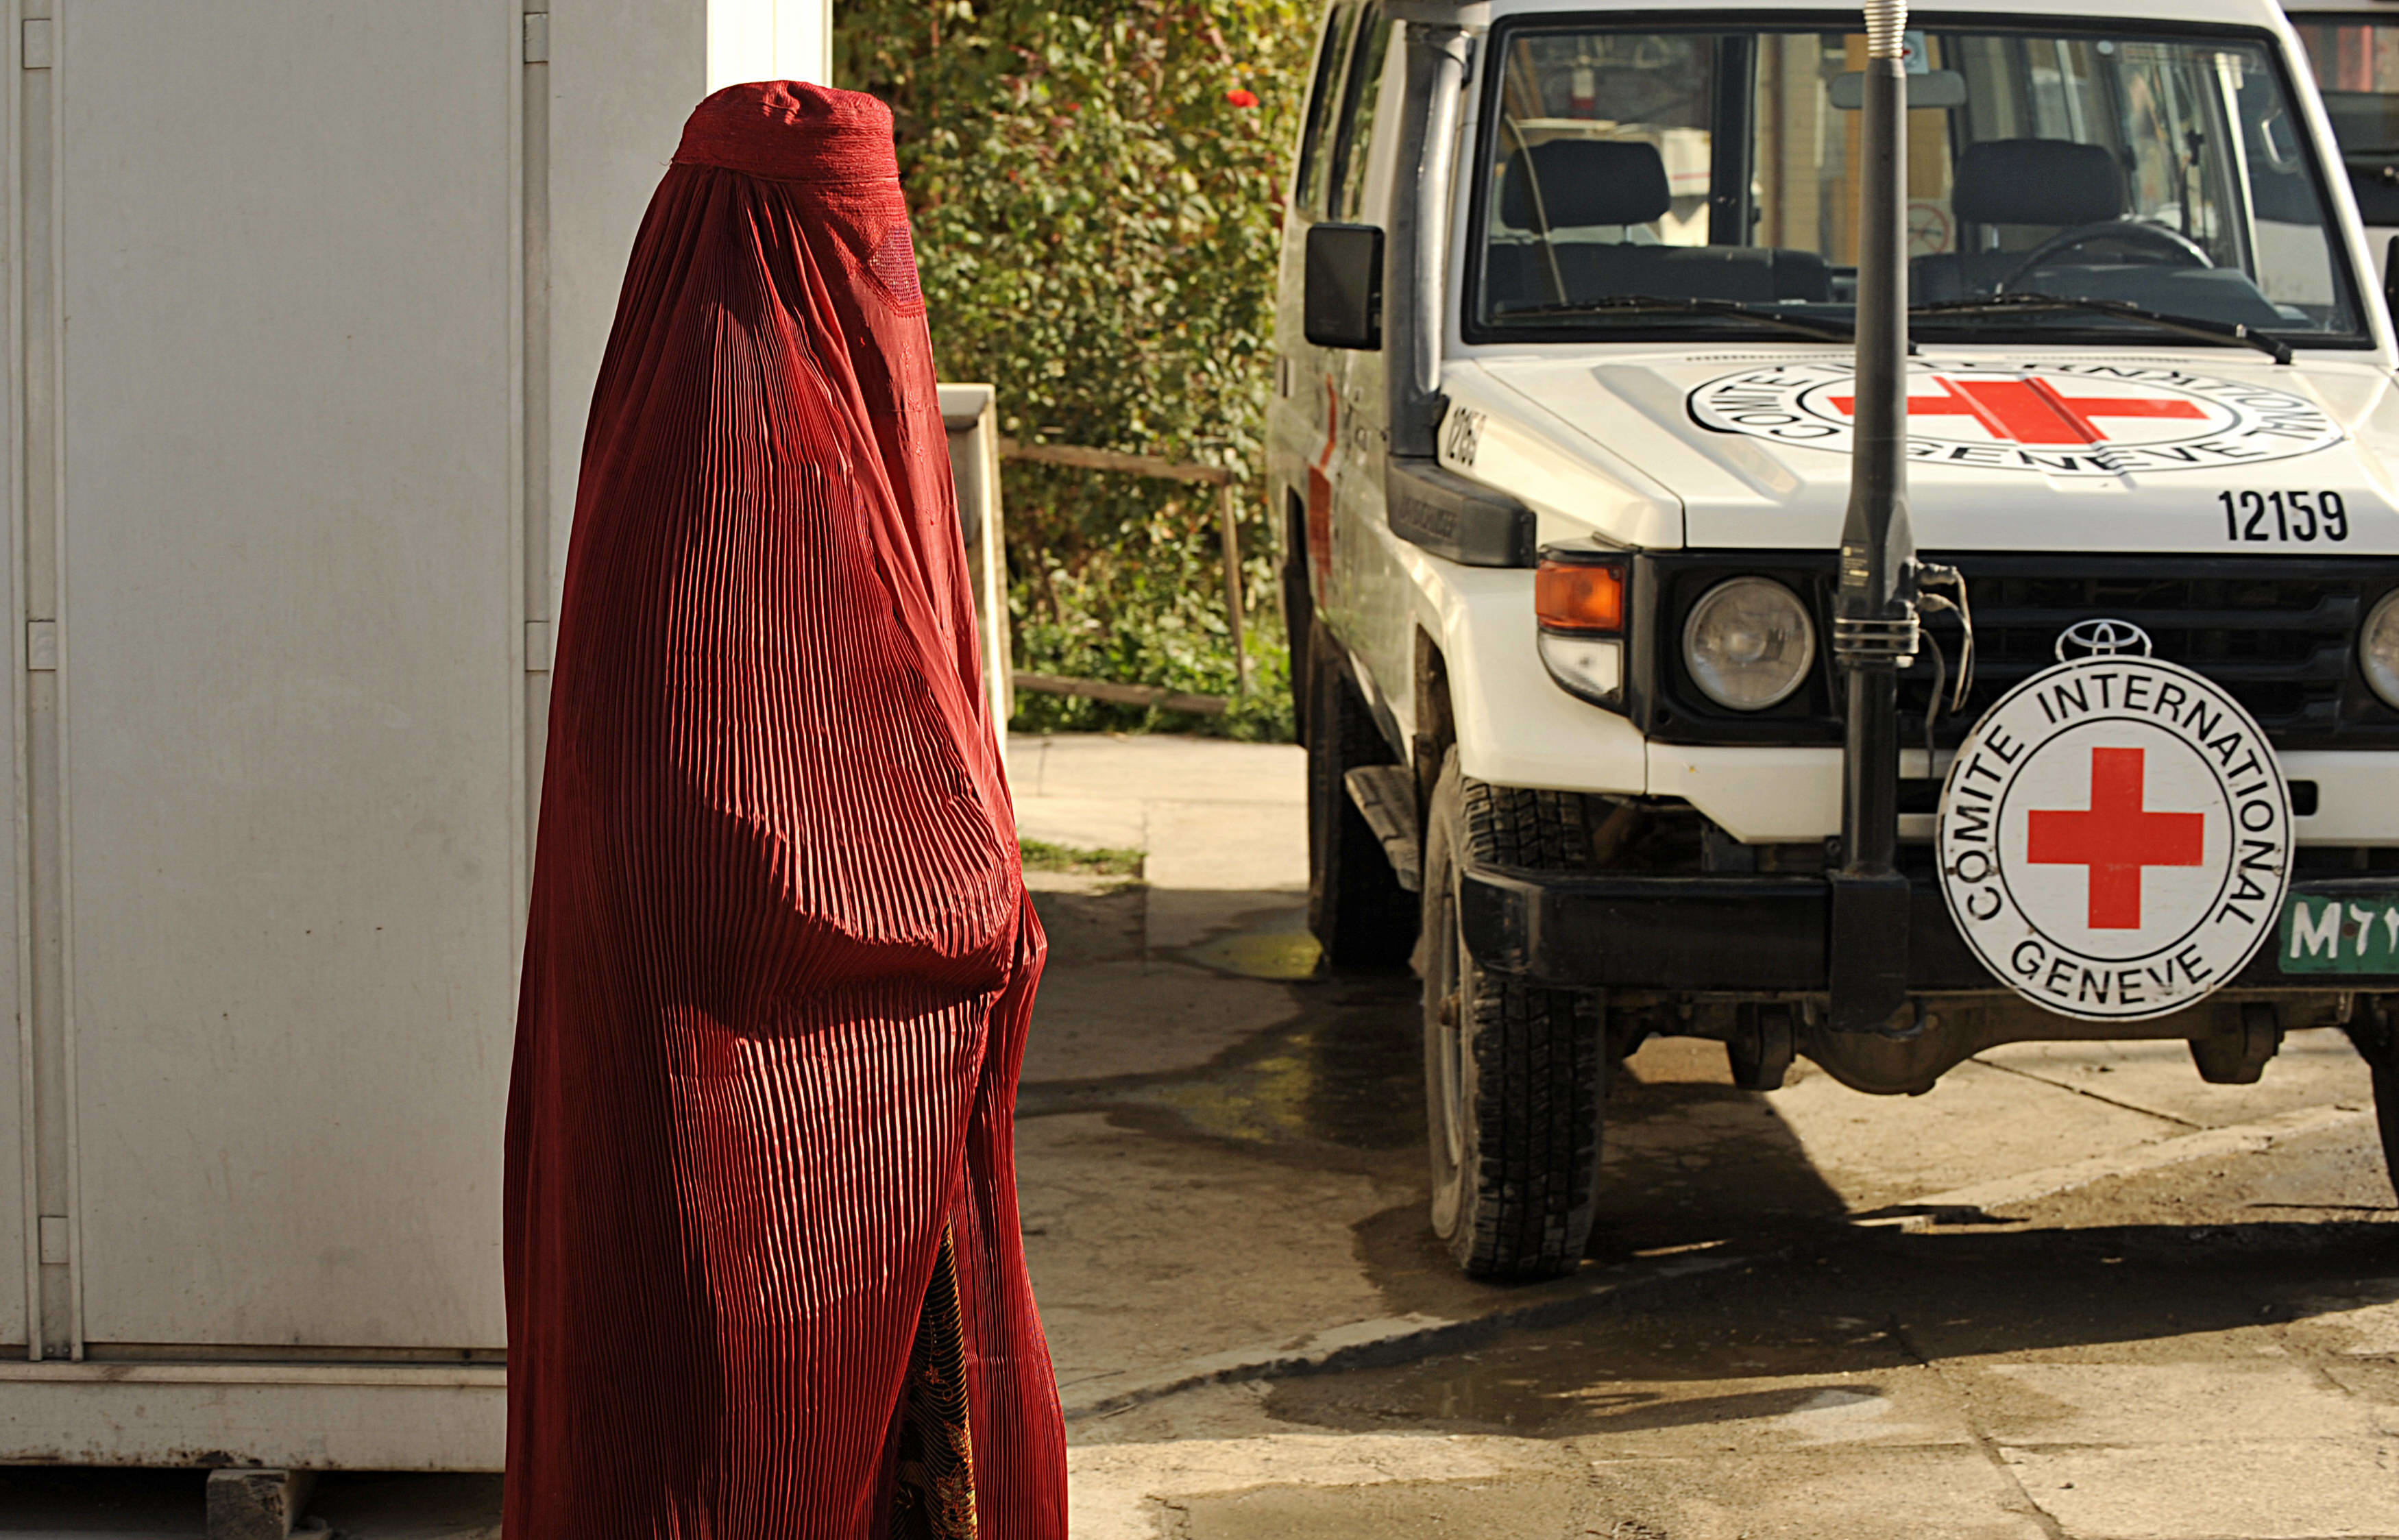 A woman walks past a Red Cross vehicle in Kabul (file photo).